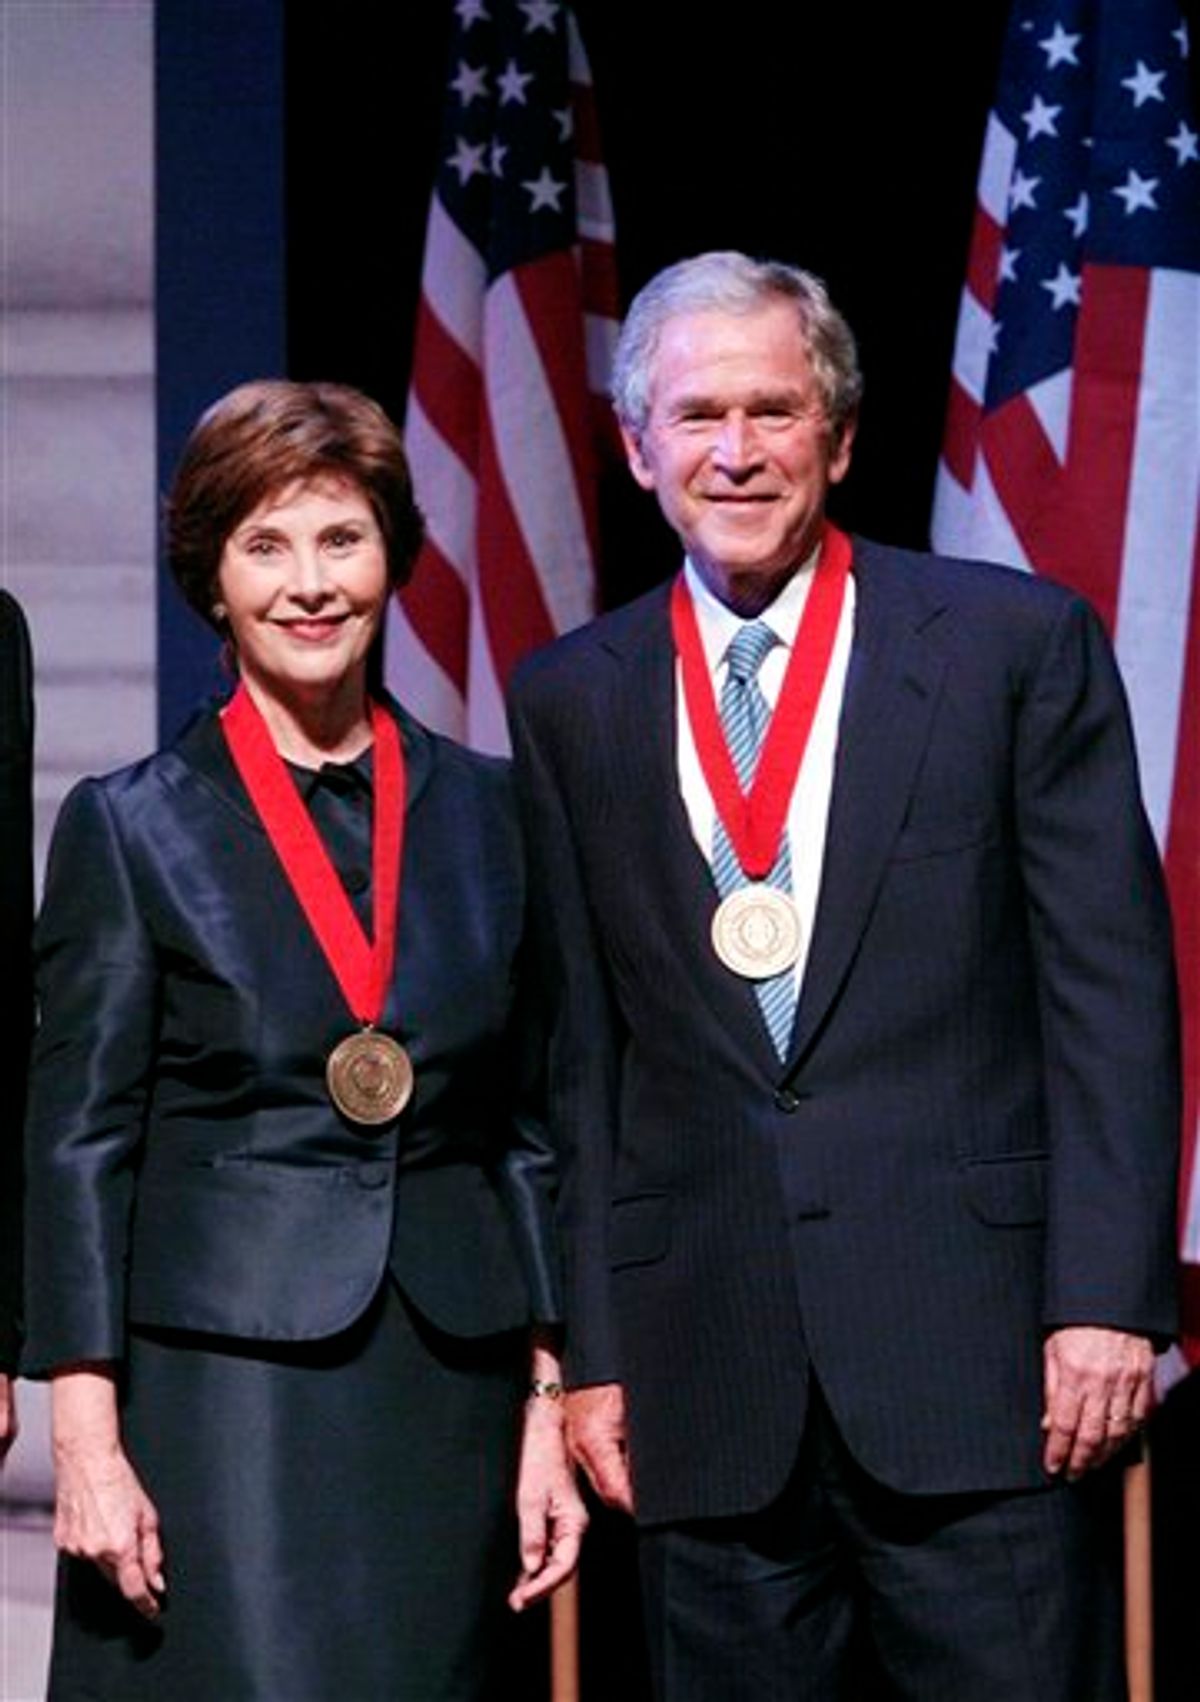 Former President George W. Bush and former First Lady Laura W. Bush pose for photographs after receiving the Southern Methodist University John Goodwin Tower Center Medal of Freedom Wednesday, April 21, 2010 in Dallas. (AP Photo/Amy Gutierrez) (AP)